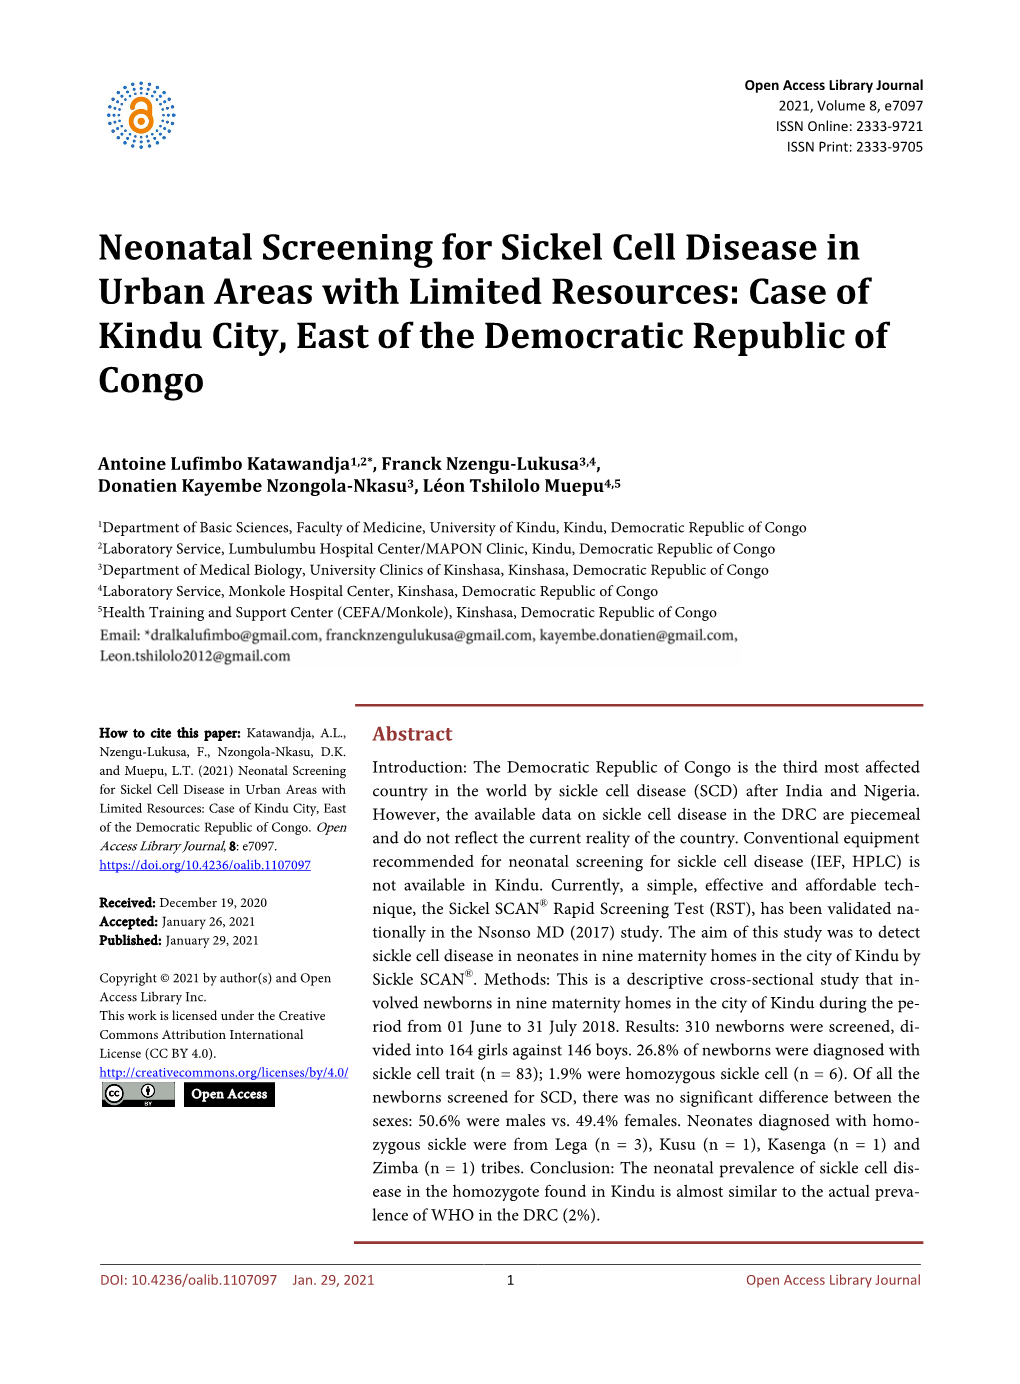 Neonatal Screening for Sickel Cell Disease in Urban Areas with Limited Resources: Case of Kindu City, East of the Democratic Republic of Congo